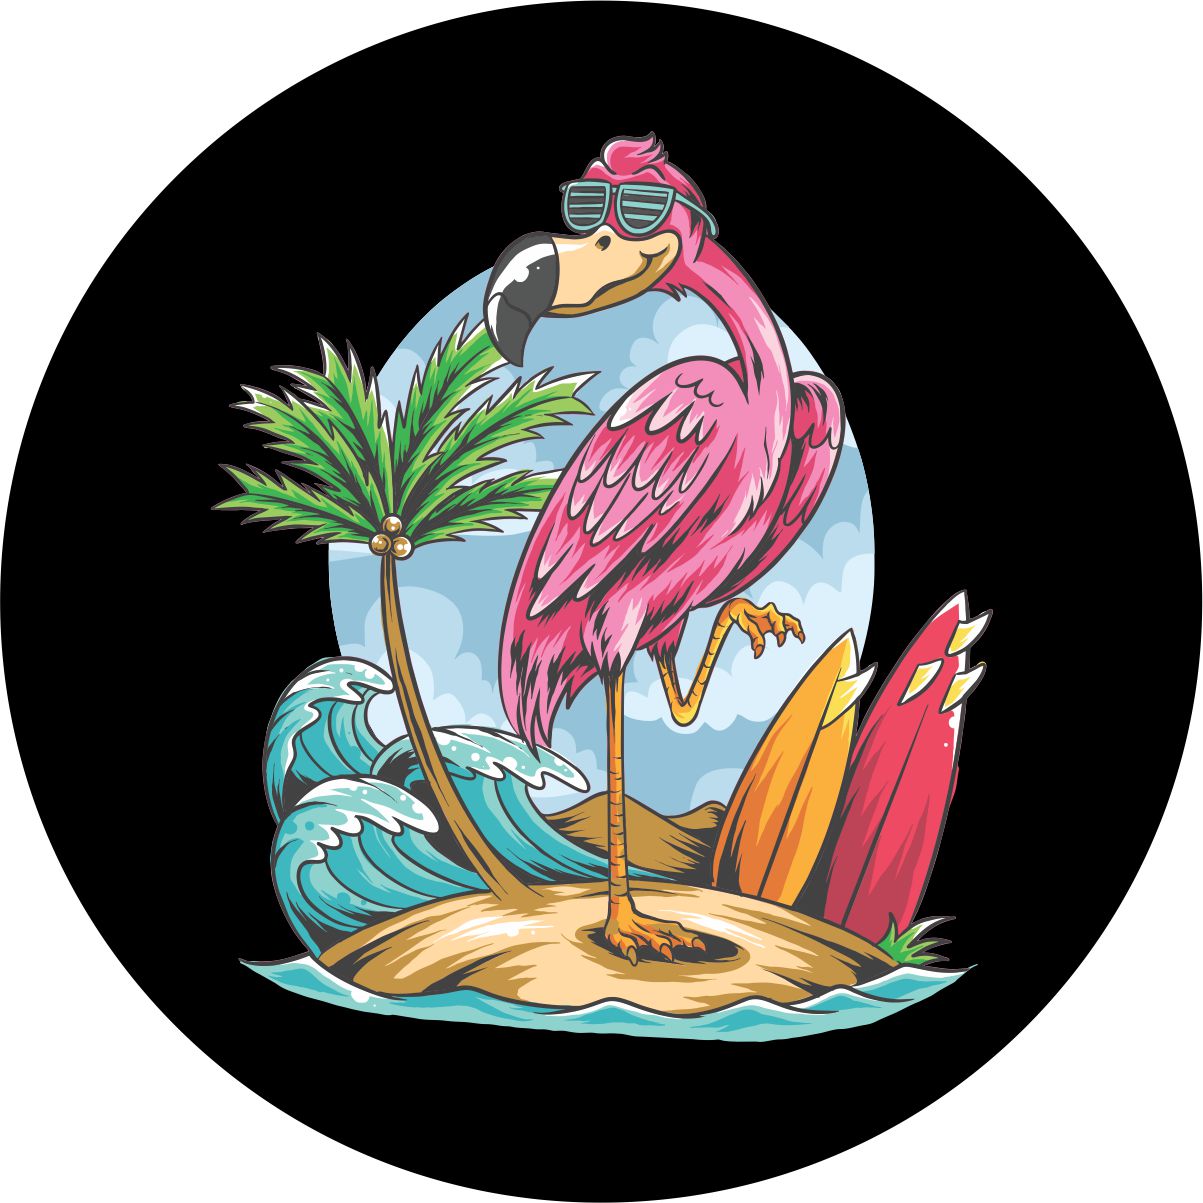 Beach spare tire cover with a pink flmaingo wearing sunglasses standing on one leg next to a palm tree and surfboards.